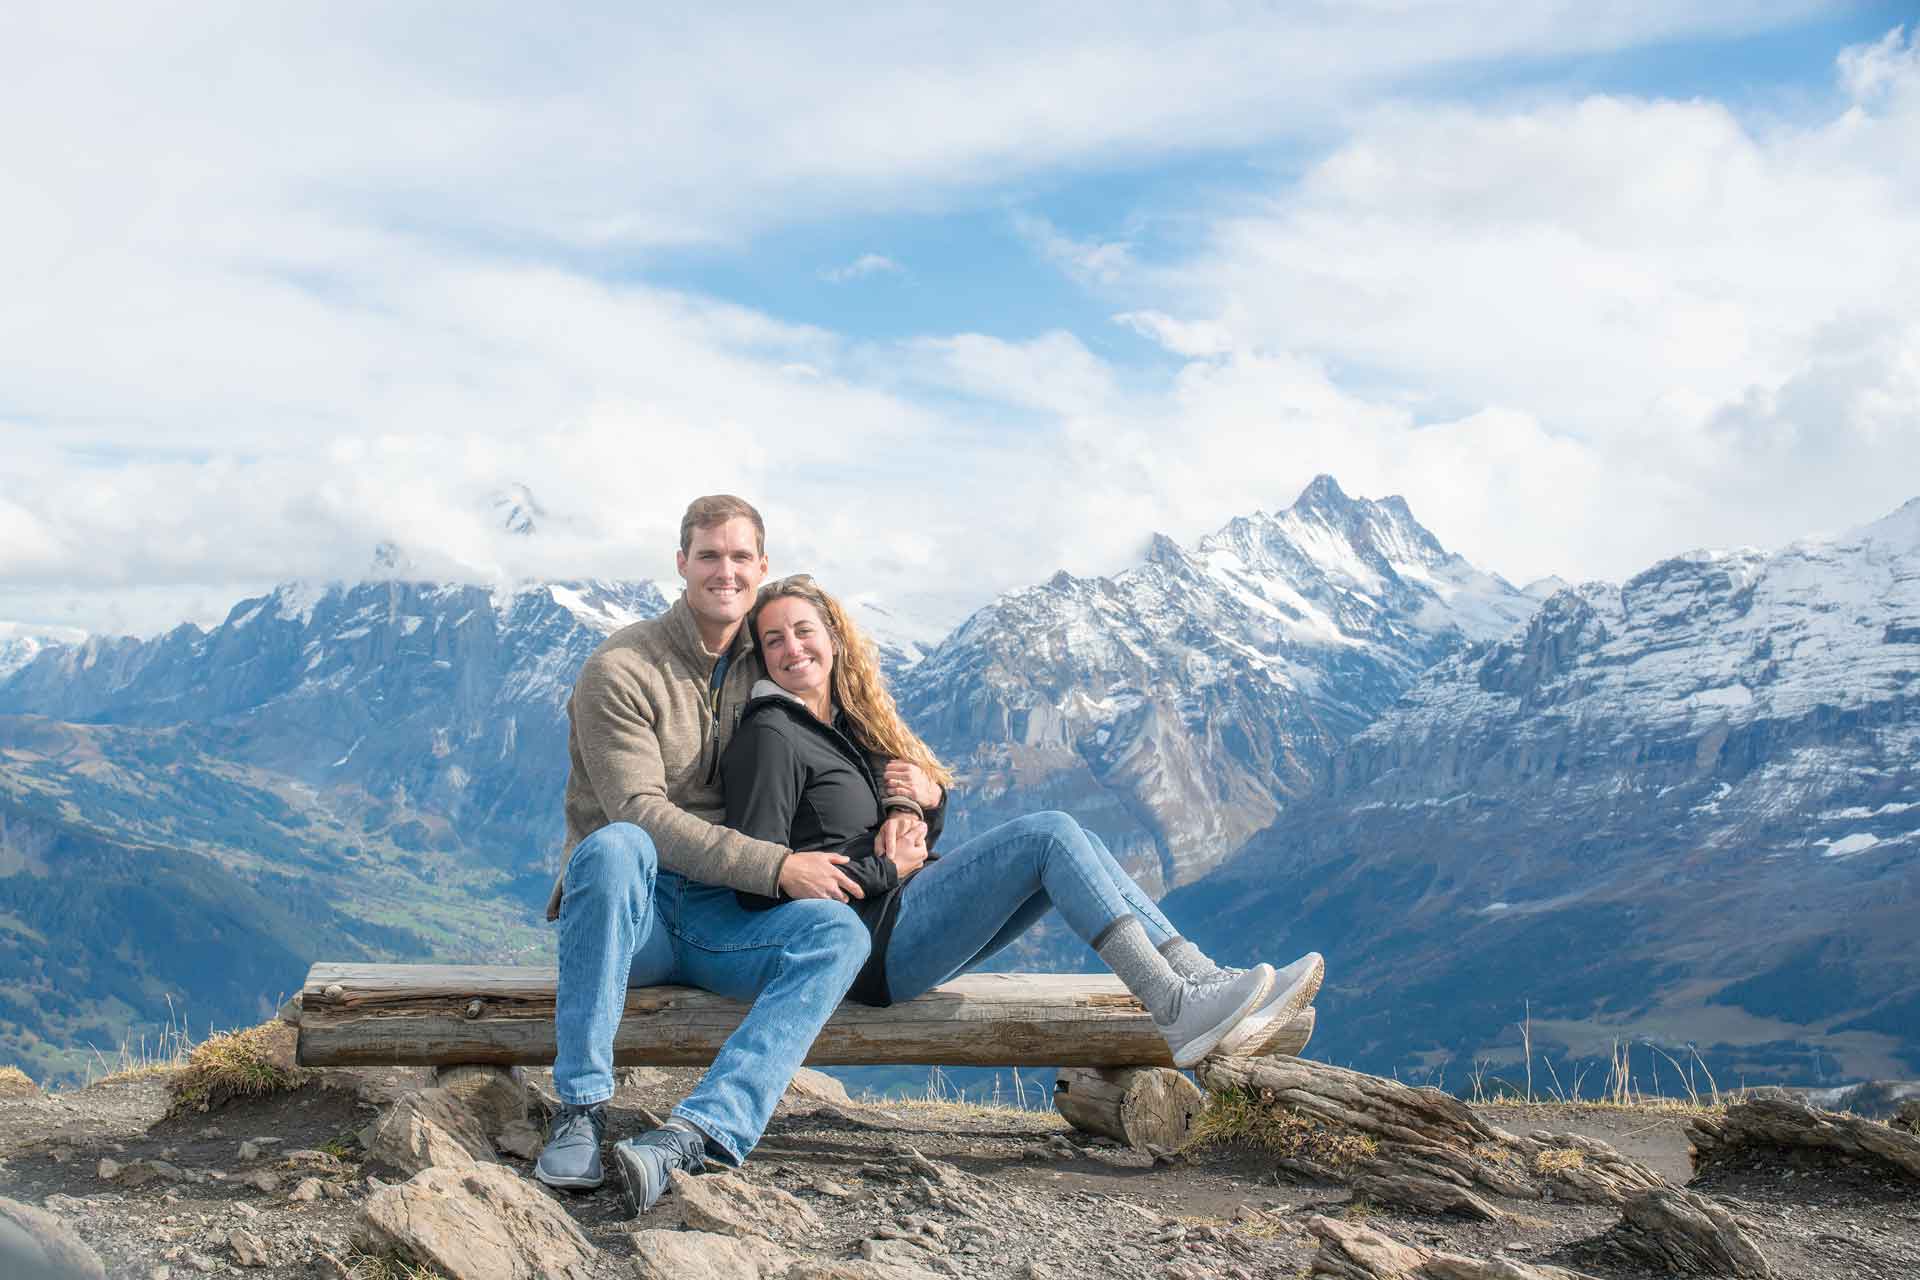 Engagement photo shoot in the Swiss Alps